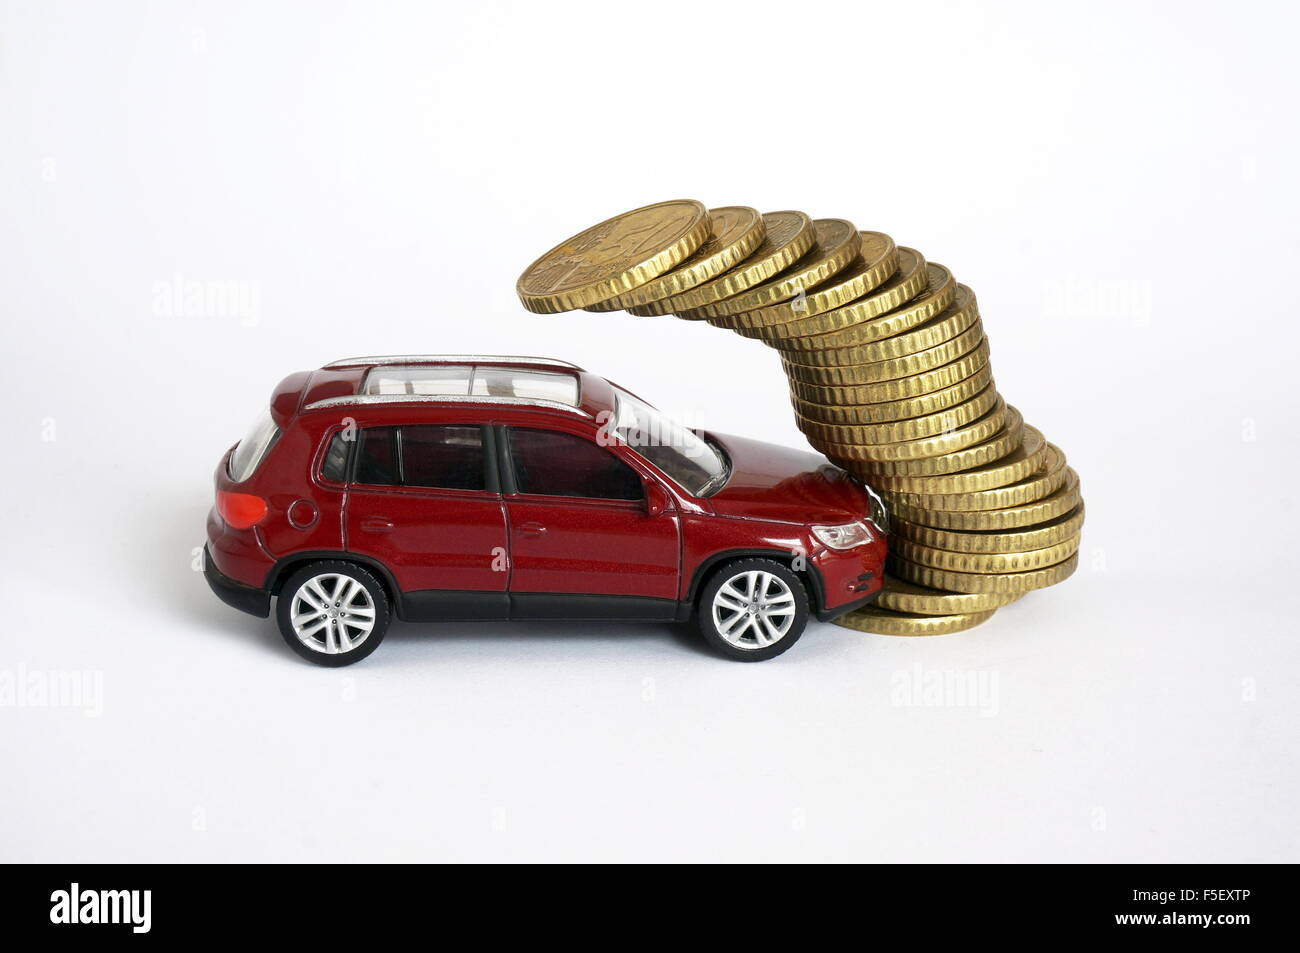 ILLUSTRATION - A Volkswagen car model 'VW Tiguan' in front of a dropping money pile. The photo was taken on 16 October 2015. Photo: S. Steinach - NO WIRE SERVICE - Stock Photo